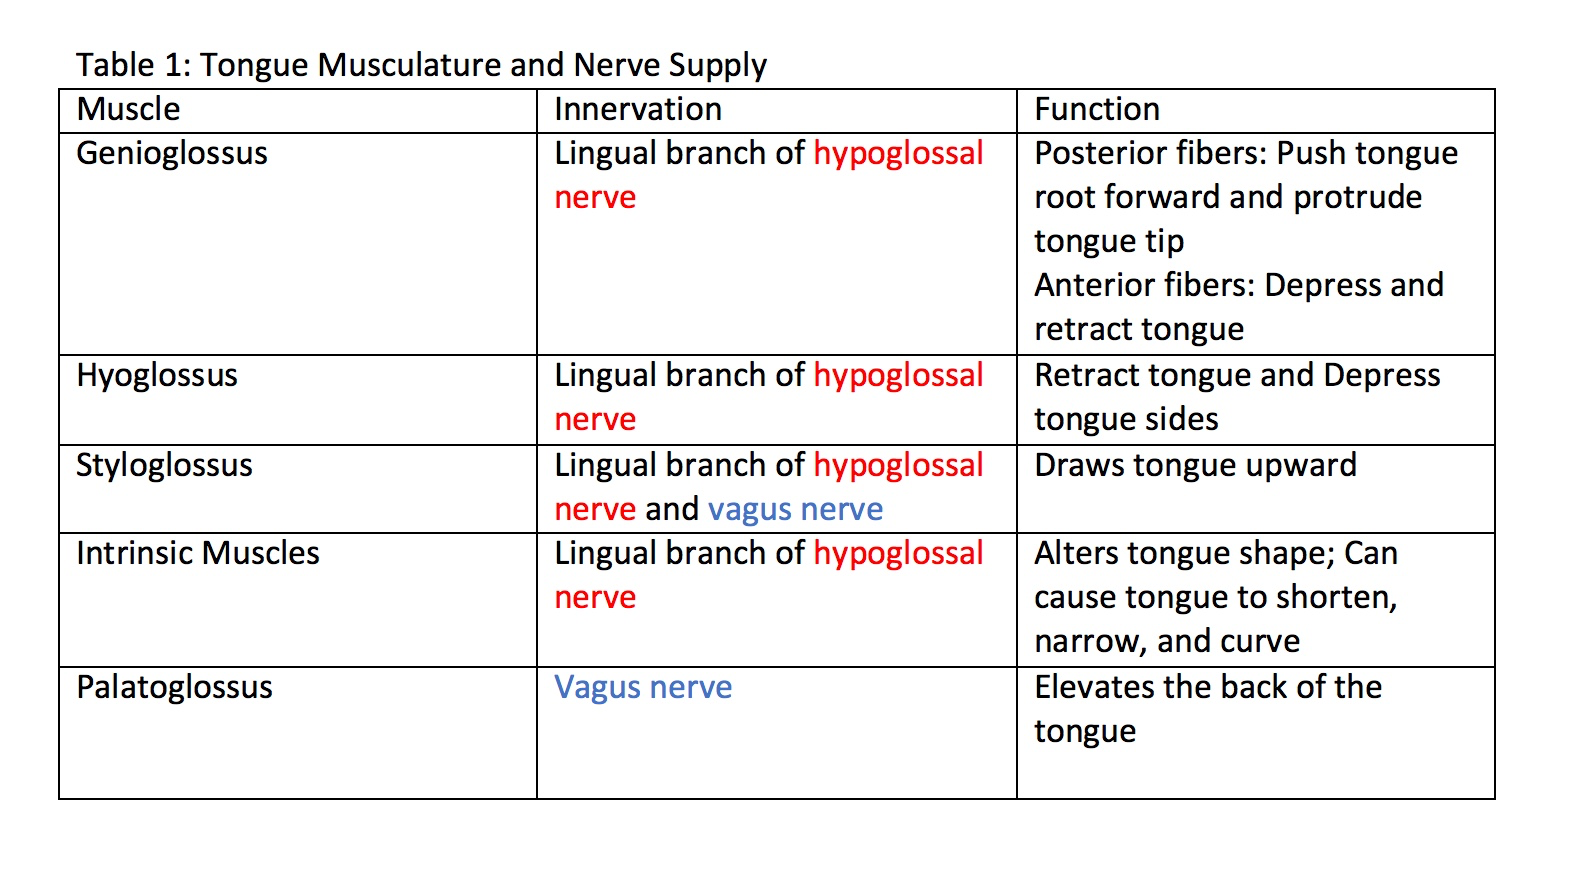 Table 1: Tongue Musculature and Nerve Supply